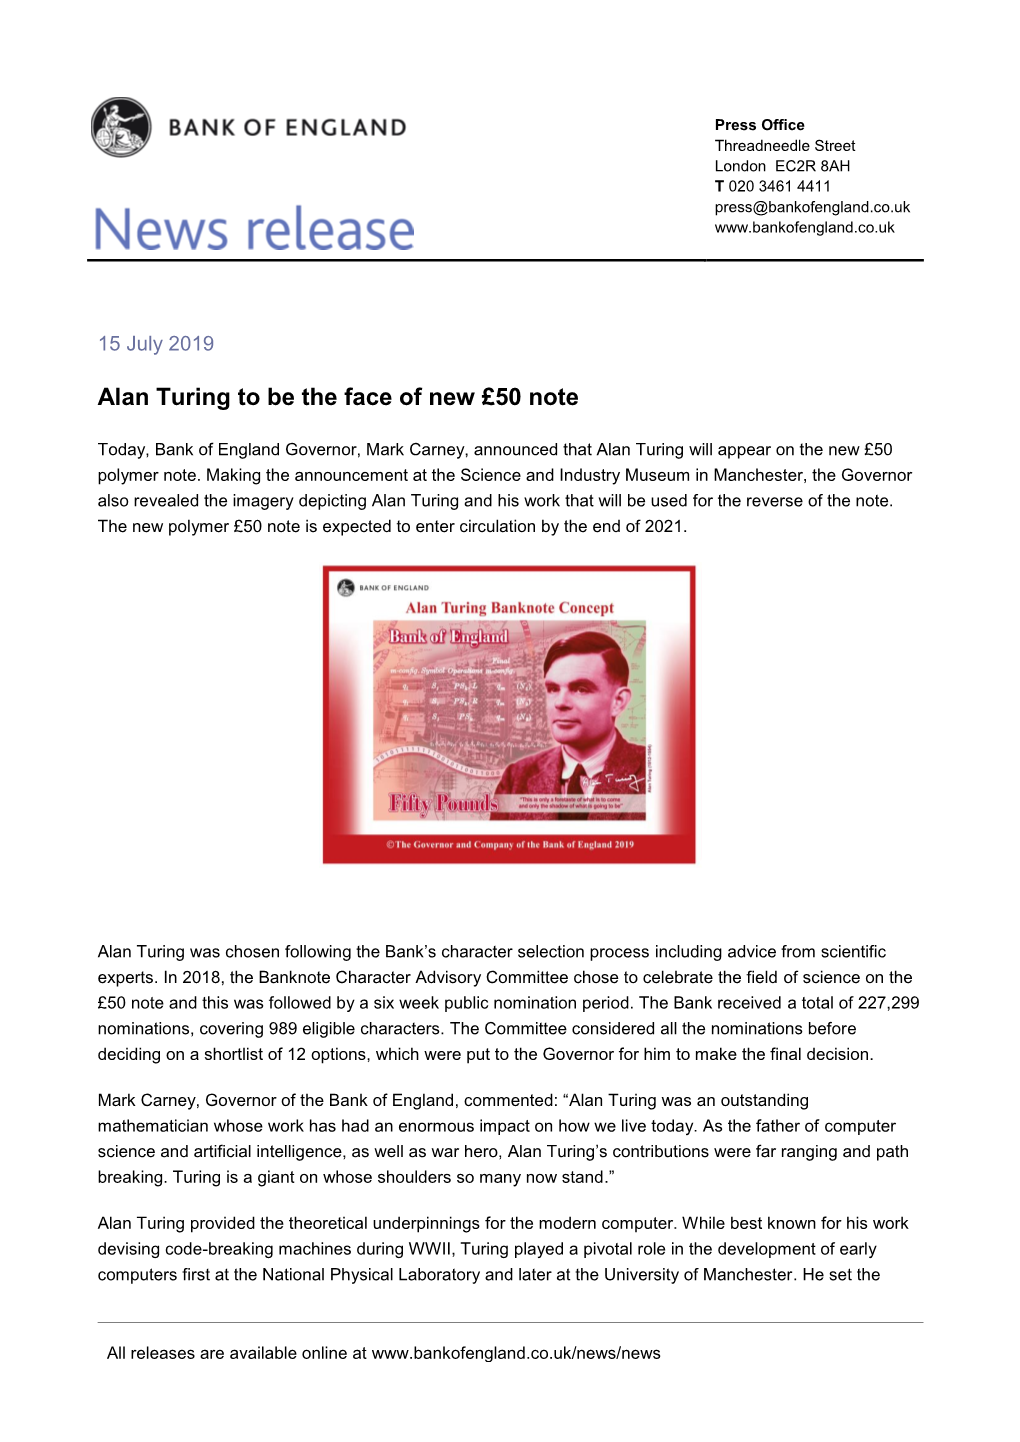 Alan Turing to Be Face of New £50 Note